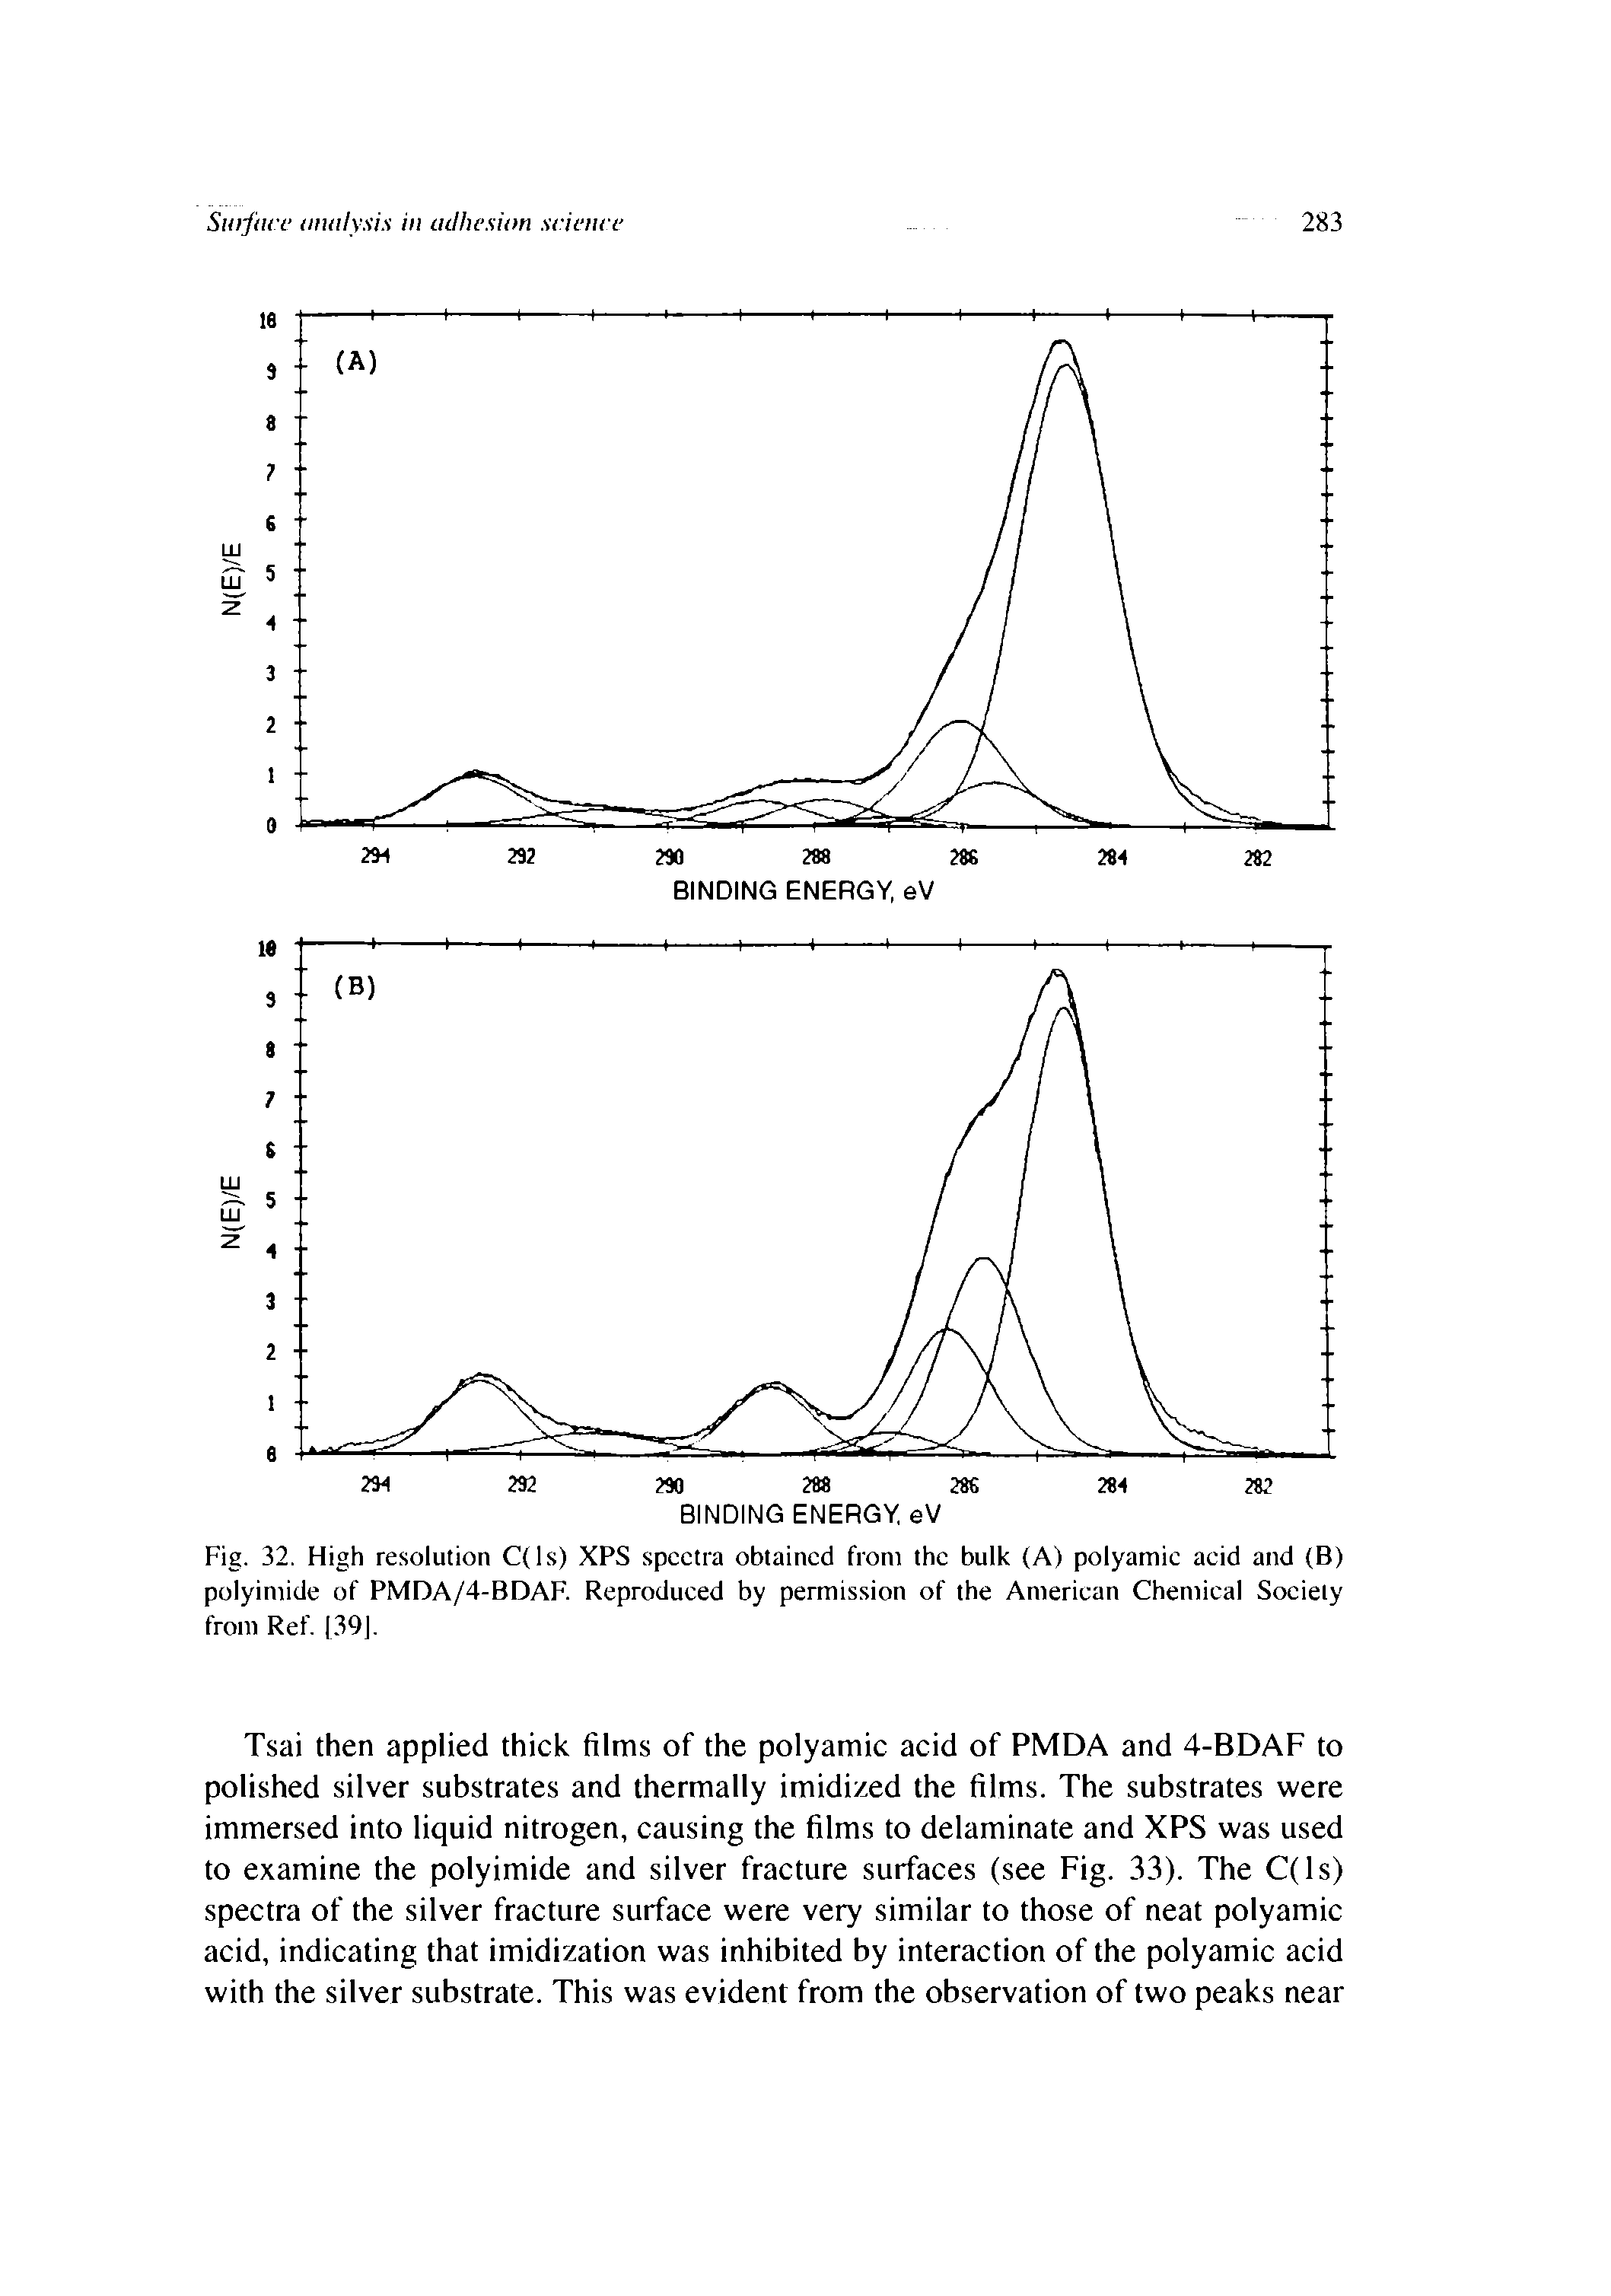 Fig. 32. High resolution C(ls) XPS spectra obtained from the bulk (A) polyamic acid and (B) polyimide of PMDA/4-BDAF. Reproduced by permission of the American Chemical Society from Ref. [39].